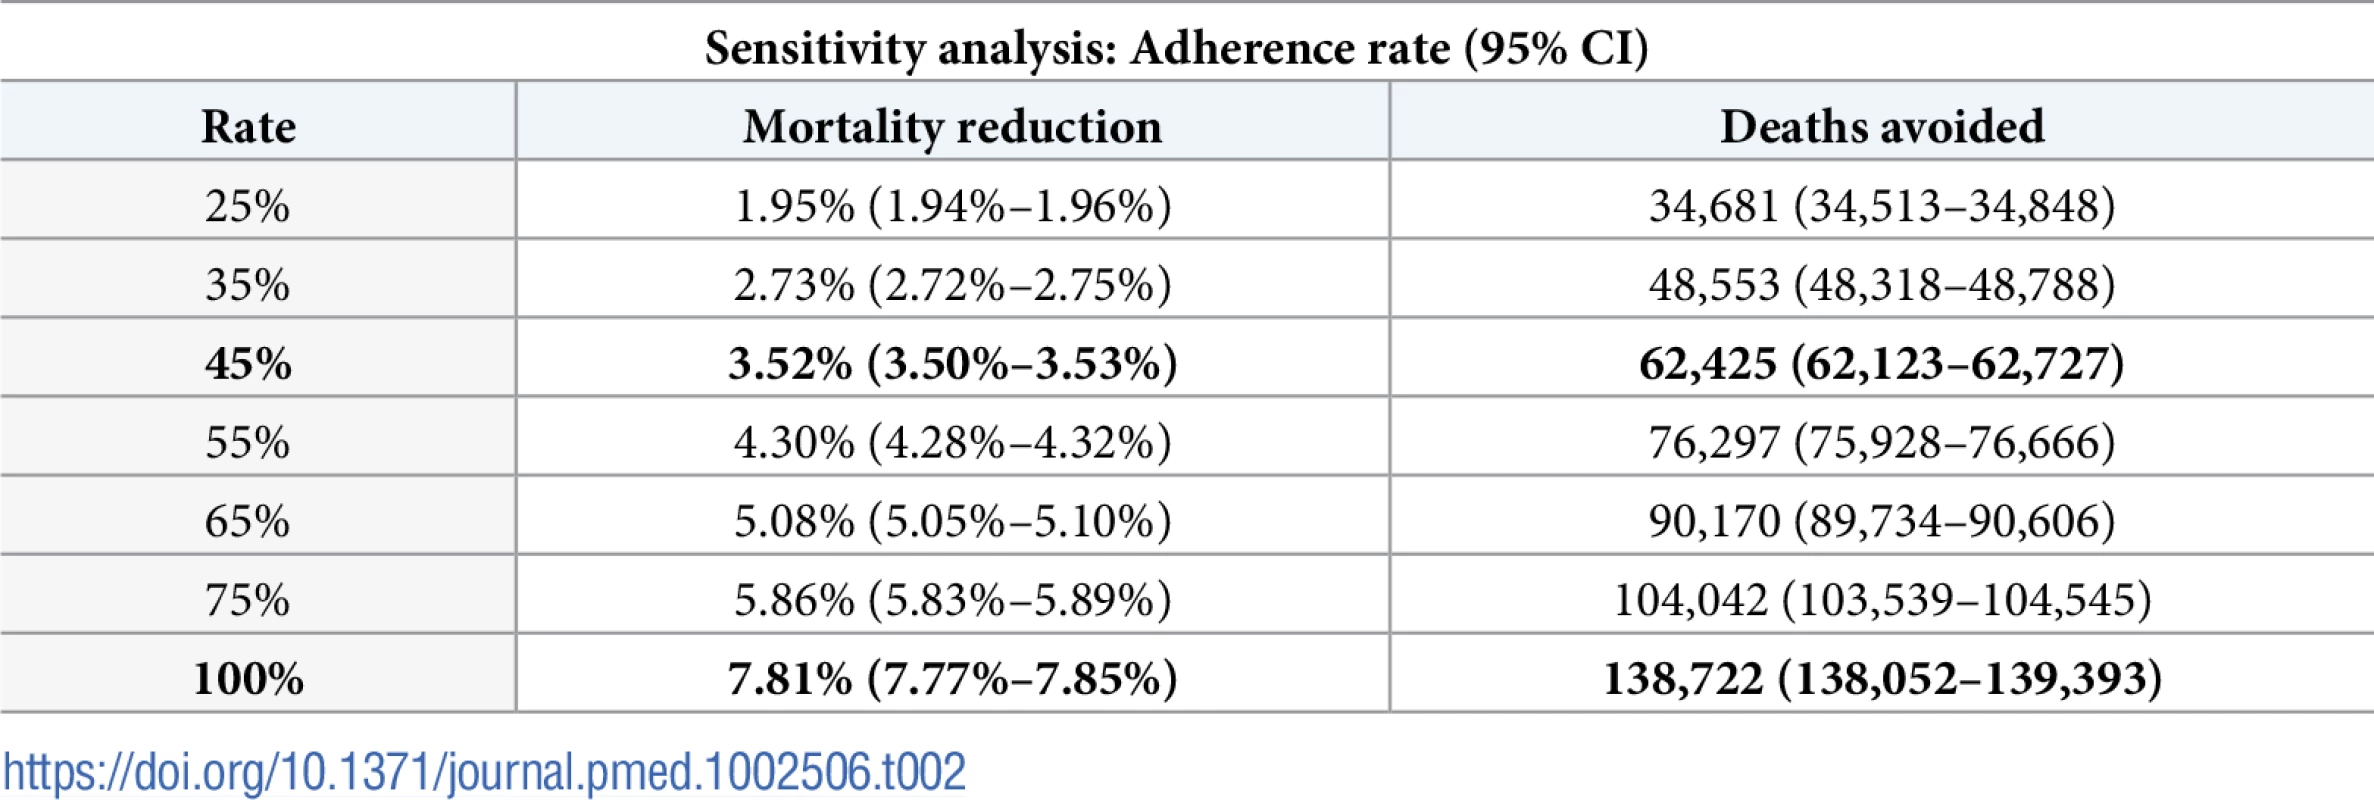 Sensitivity analysis for overall cumulative mortality reduction and total deaths avoided estimates by adherence rate.